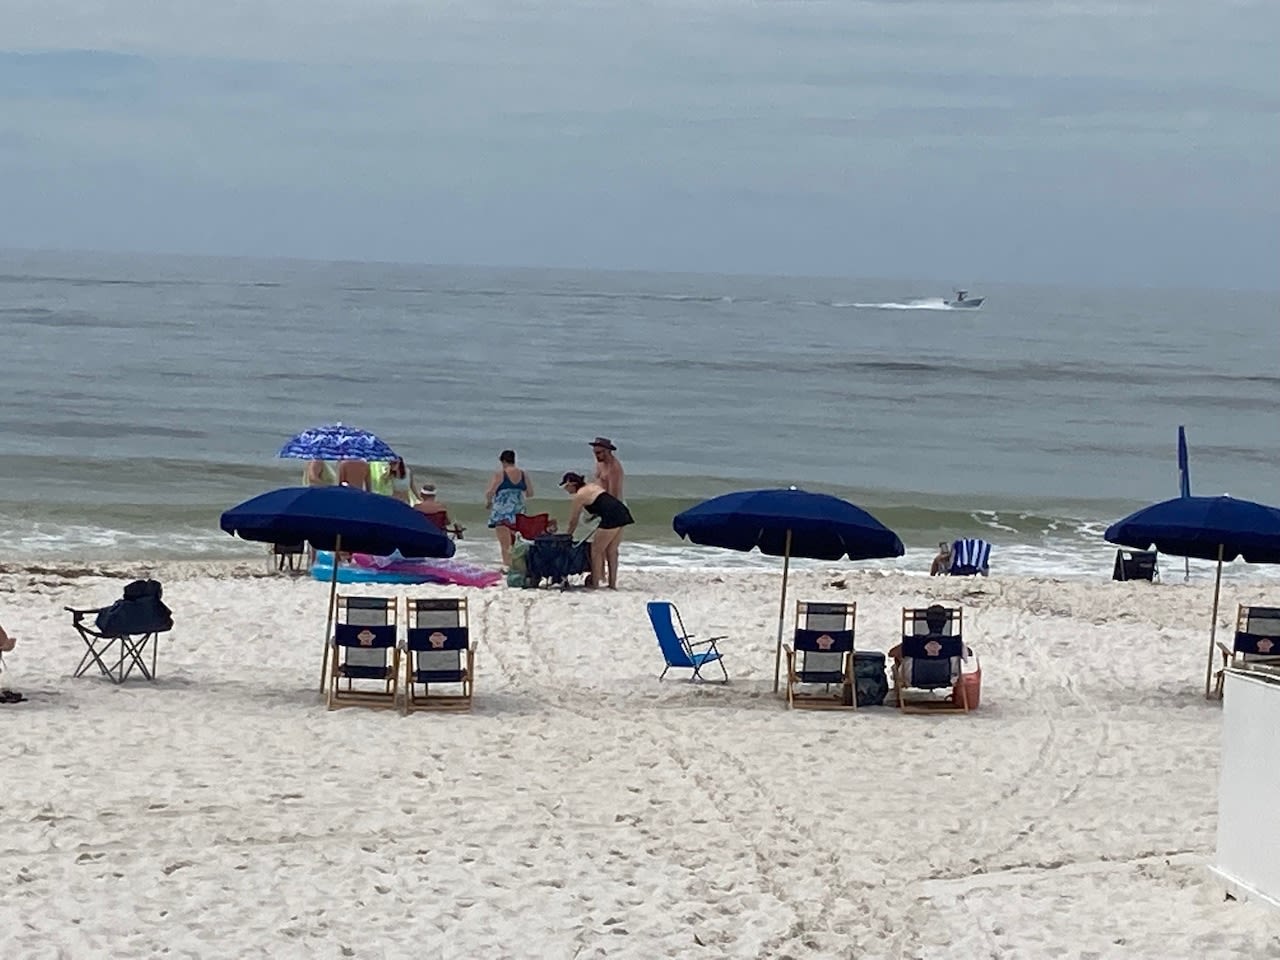 Alabama beach visitors warned about dangerous rip currents this weekend